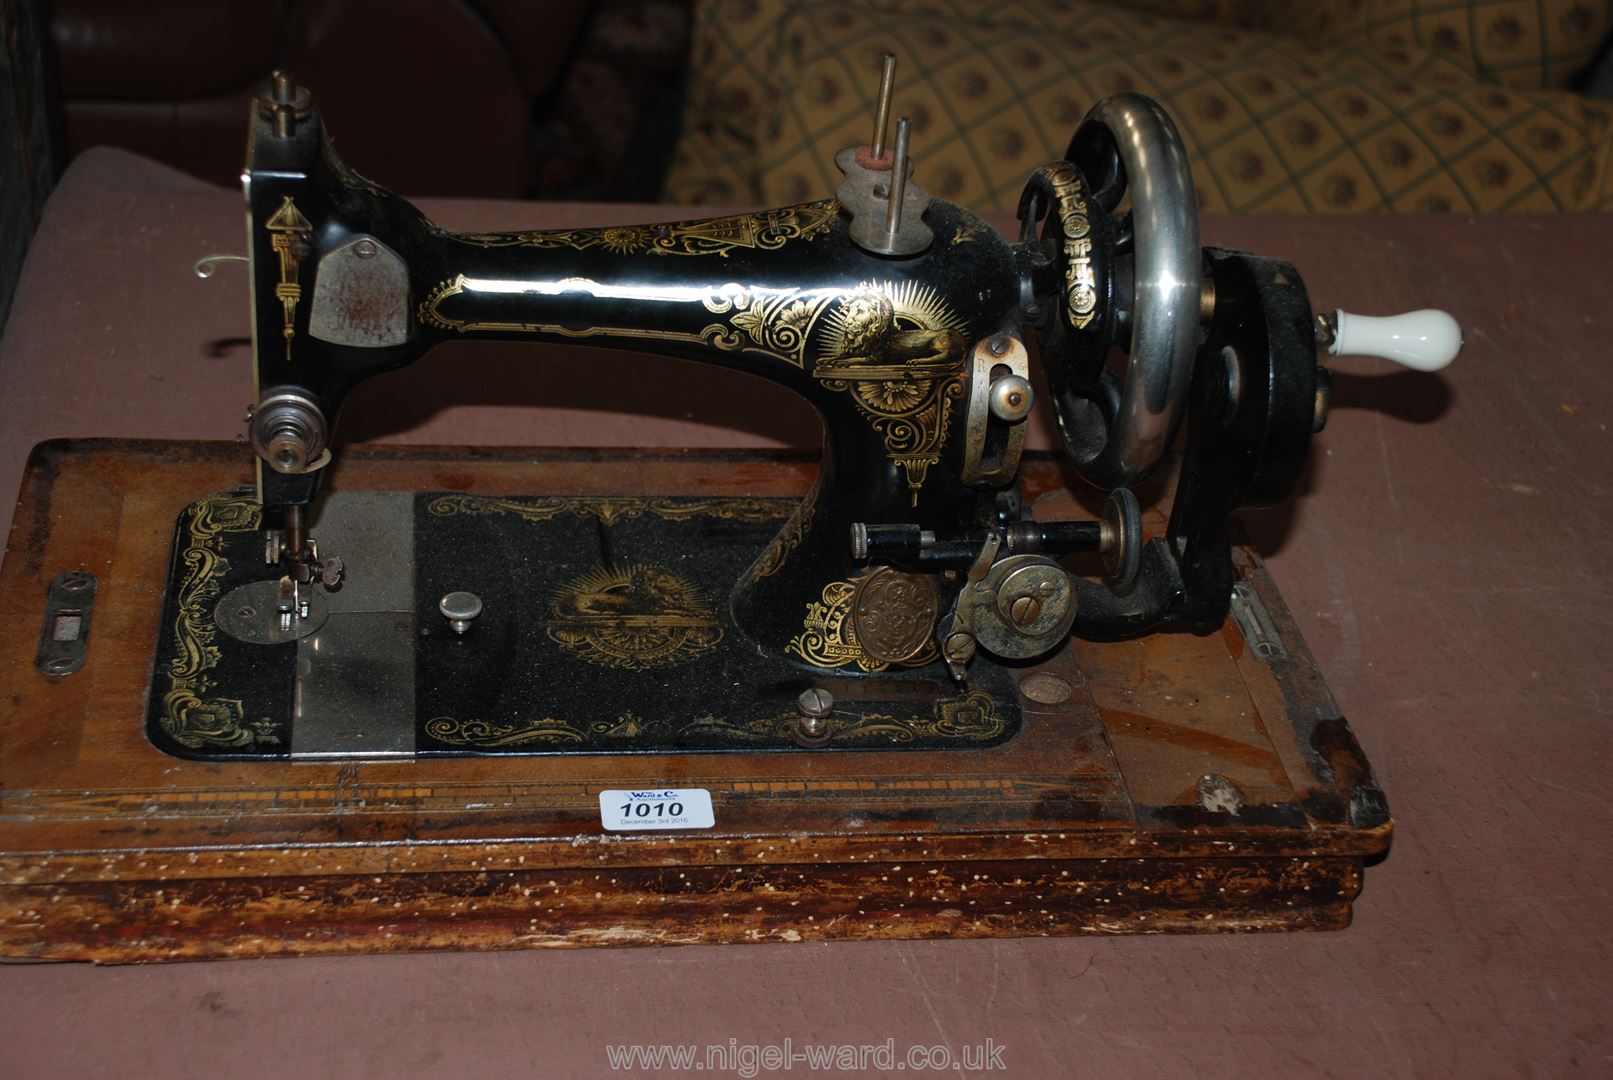 An old hand Sewing Machine with attachments, no cover.